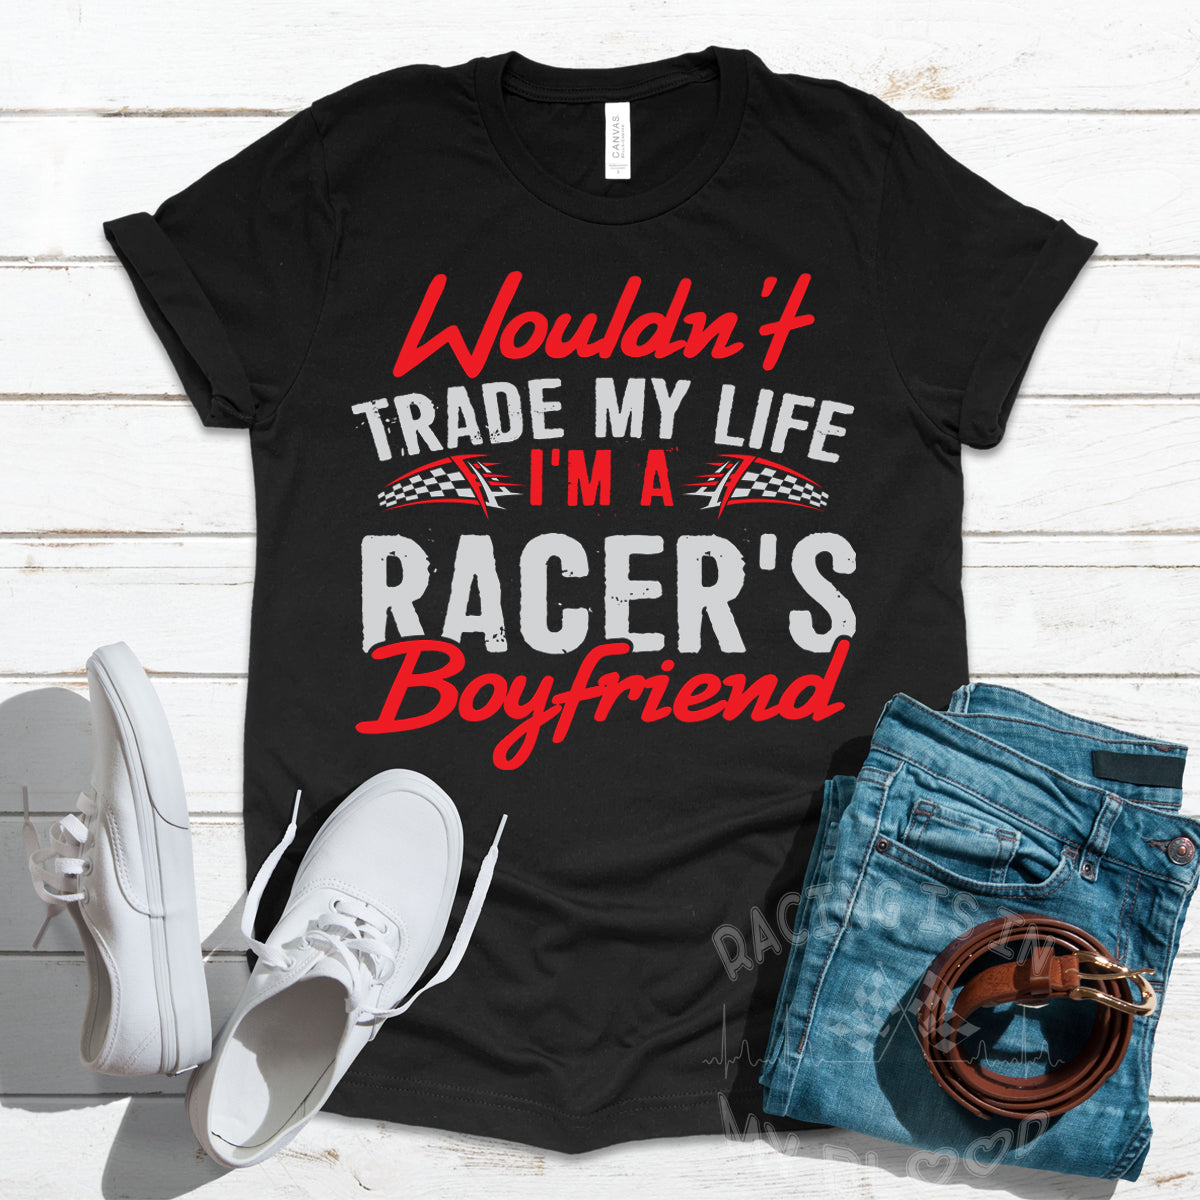 Wouldn't Trade My Life I'm A Racer's Boyfriend T-Shirts!